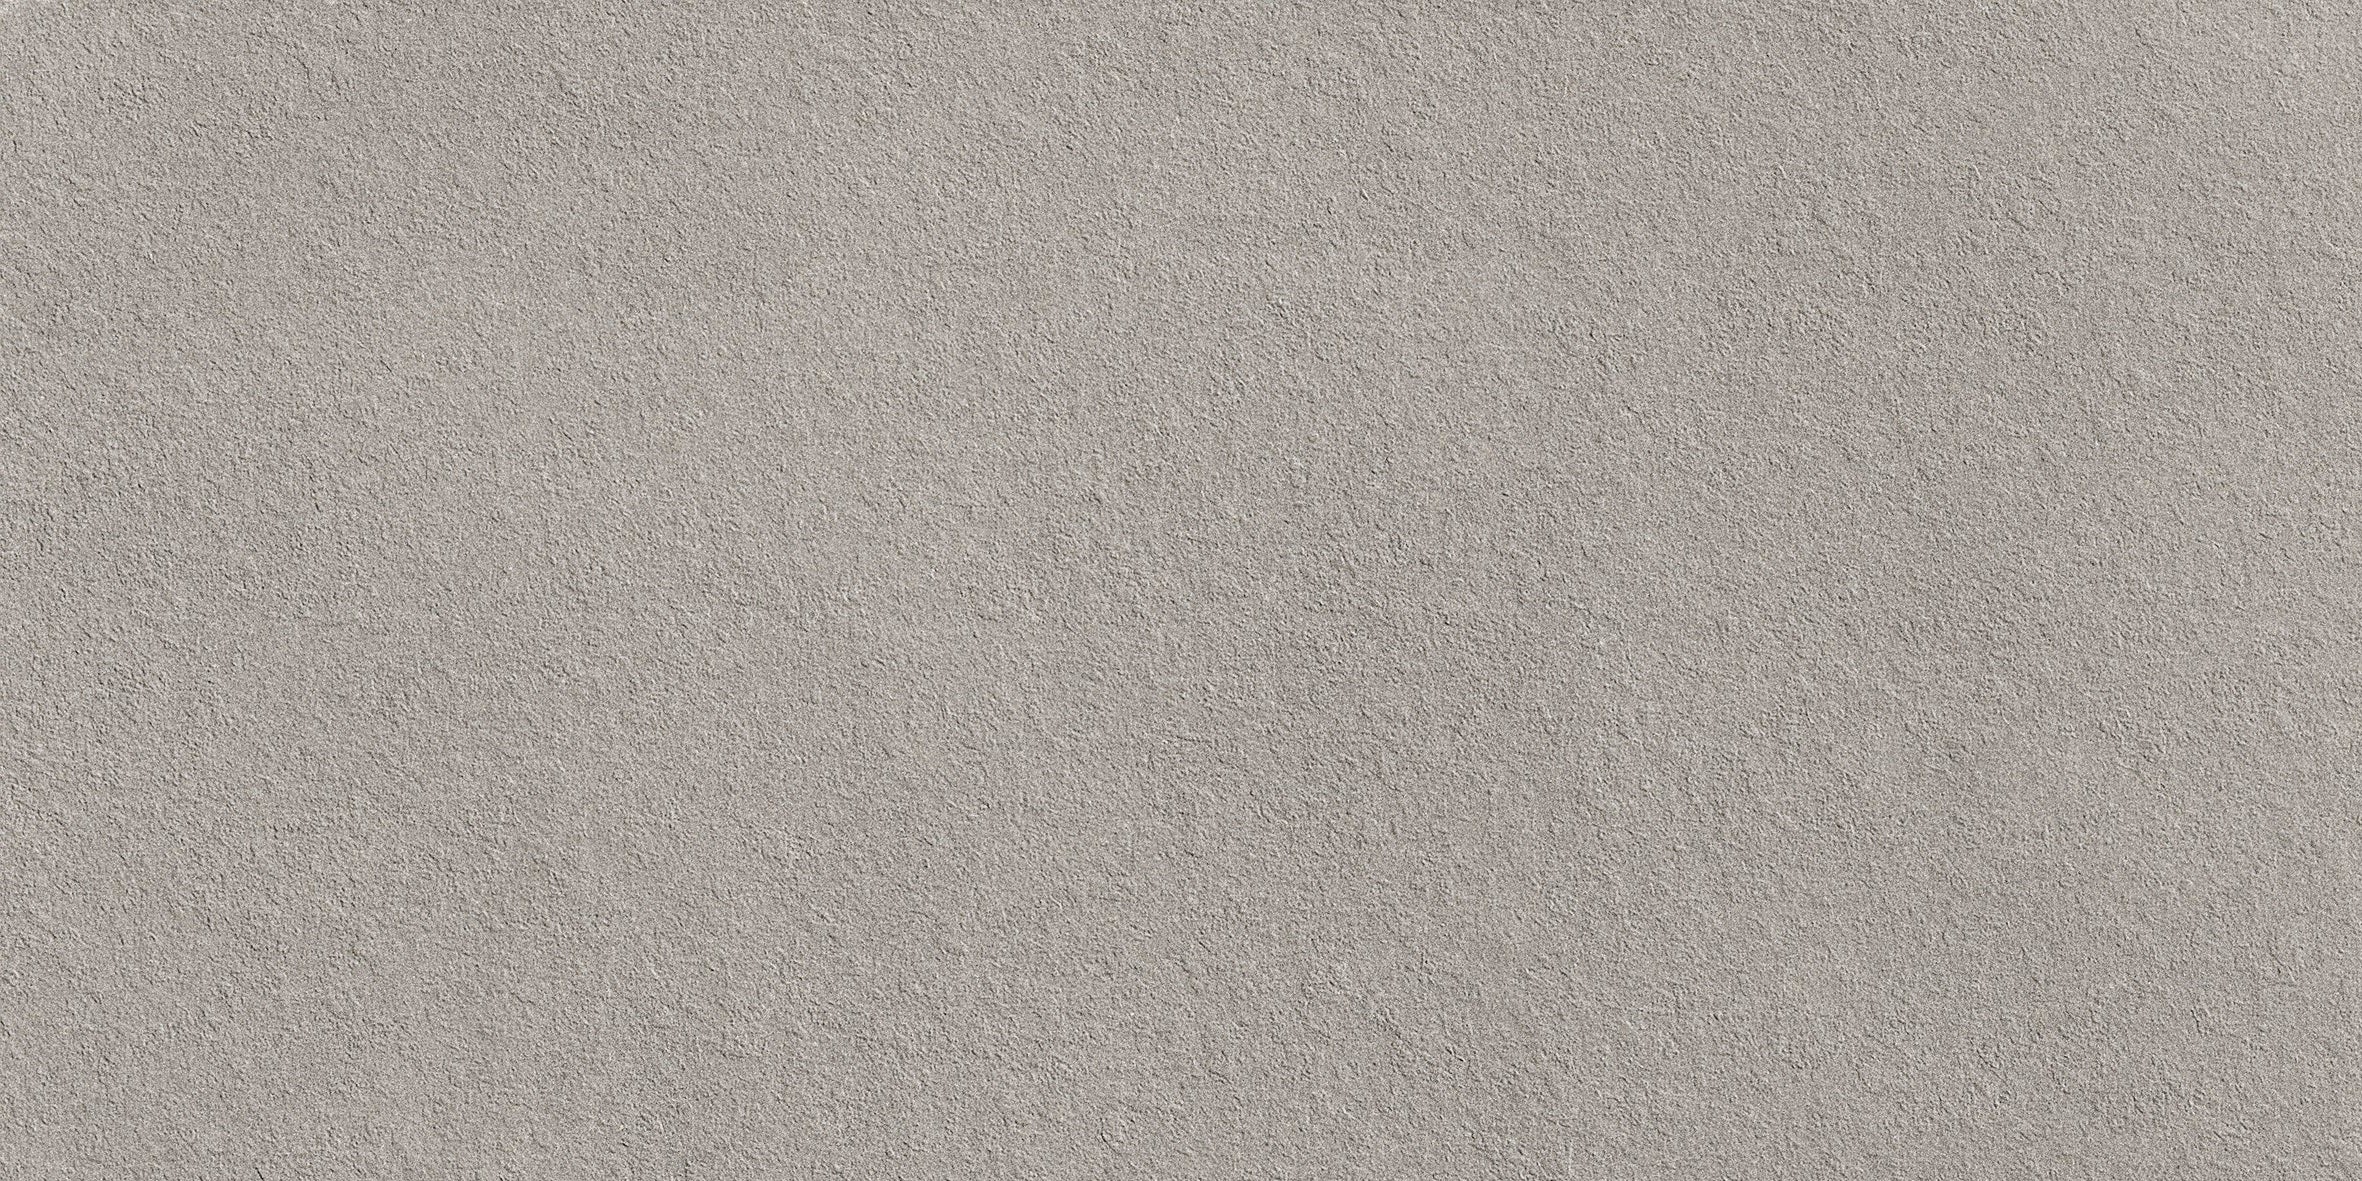 landmark frontier20 bluestone blue select thermal paver tile 12x24x20mm matte rectified porcelain tile distributed by surface group international